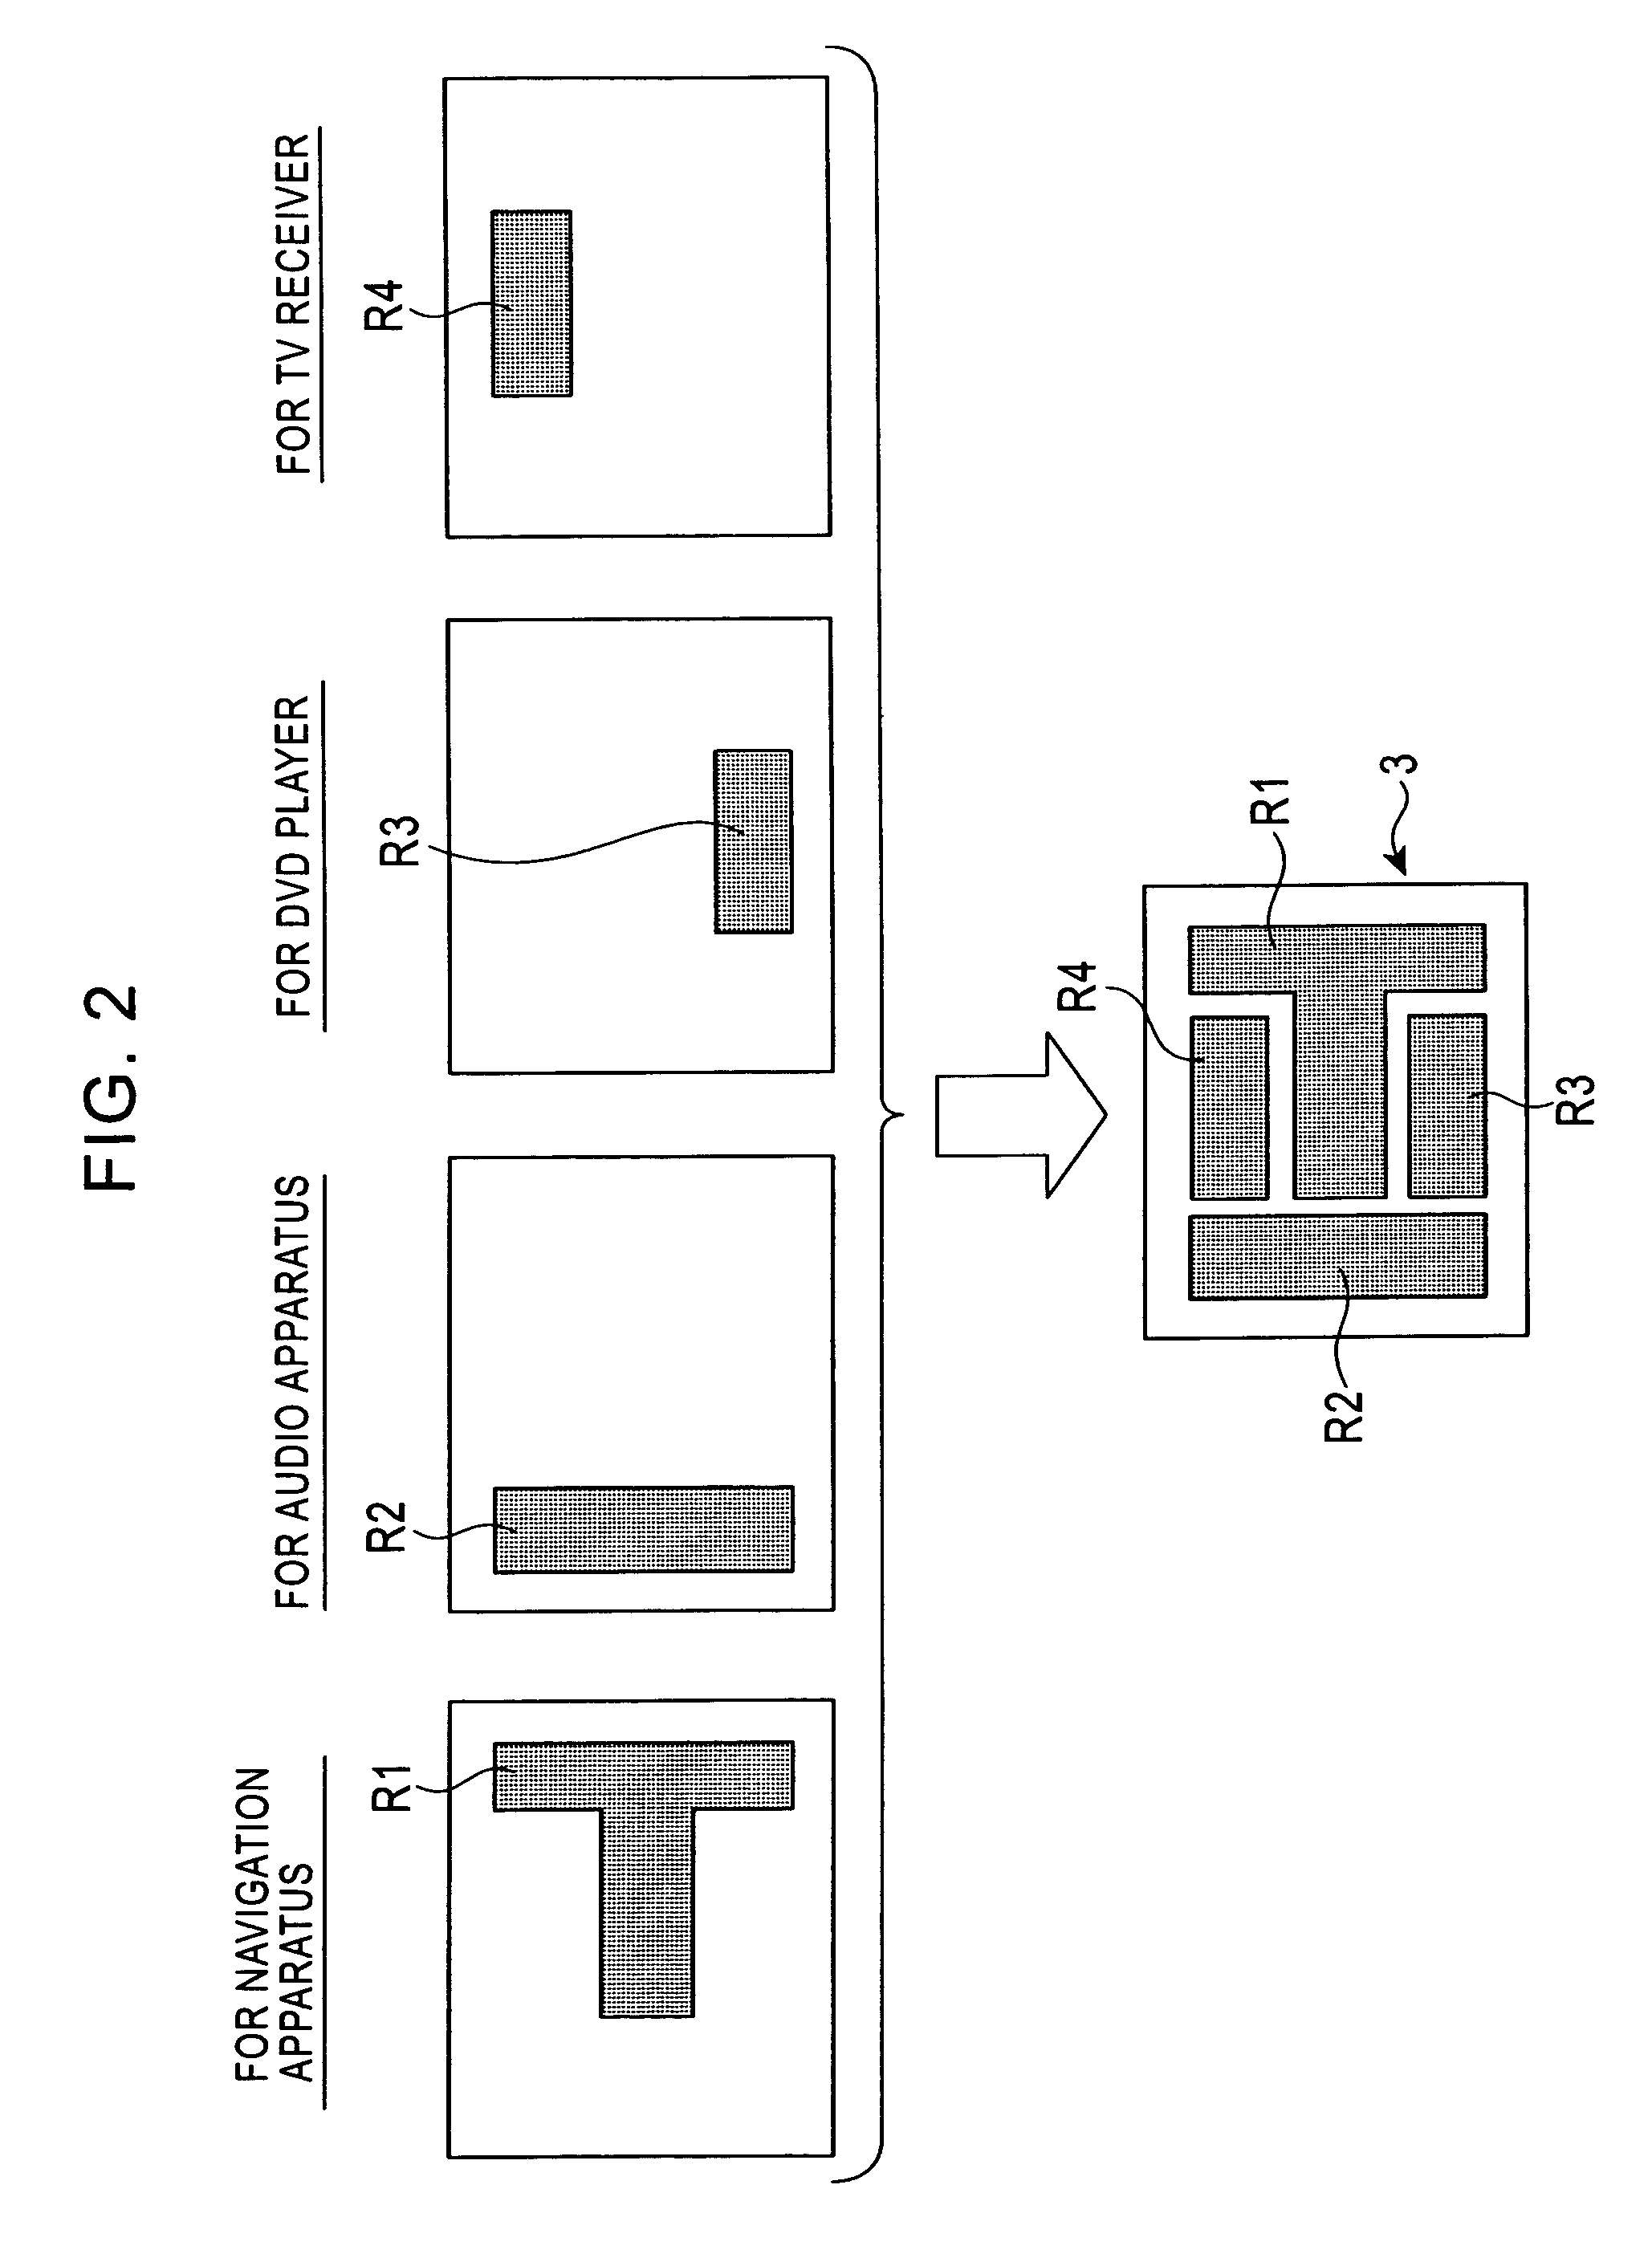 Display control system, operation input apparatus, and display control method